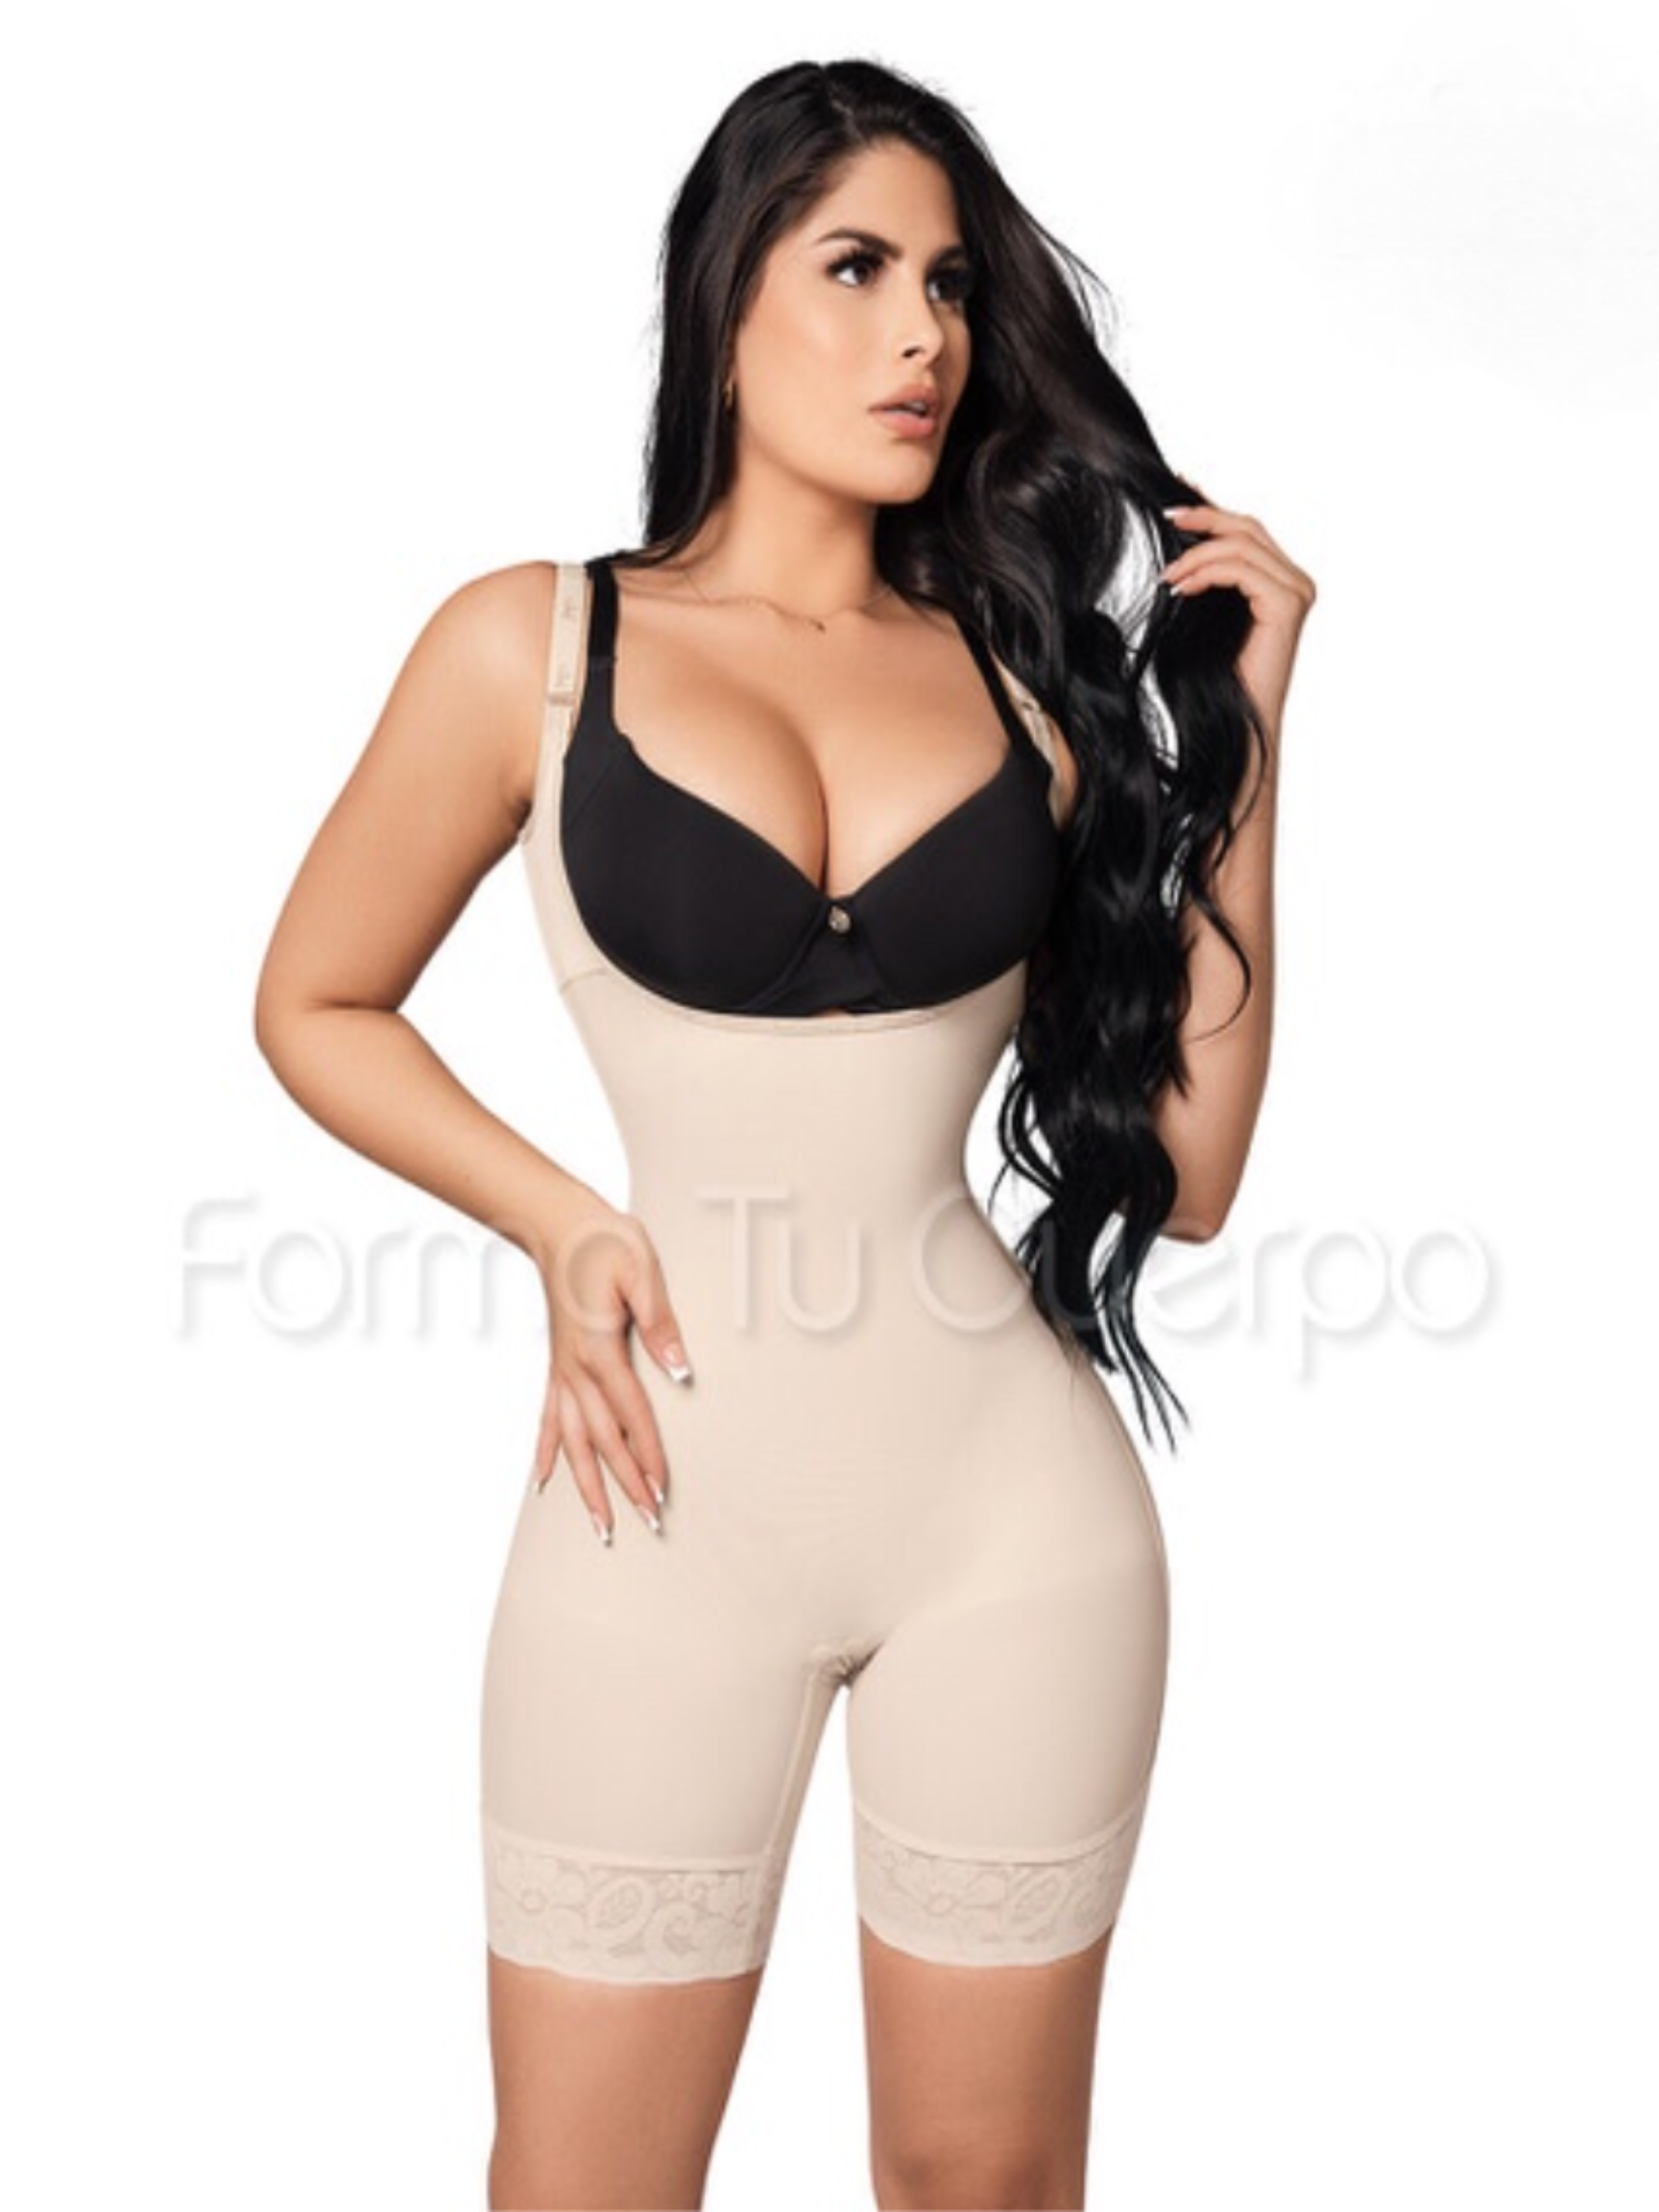 Lightweight Adjustable Straps Body Shaper Tummy Control - Shapers - Dream  Body Contouringg